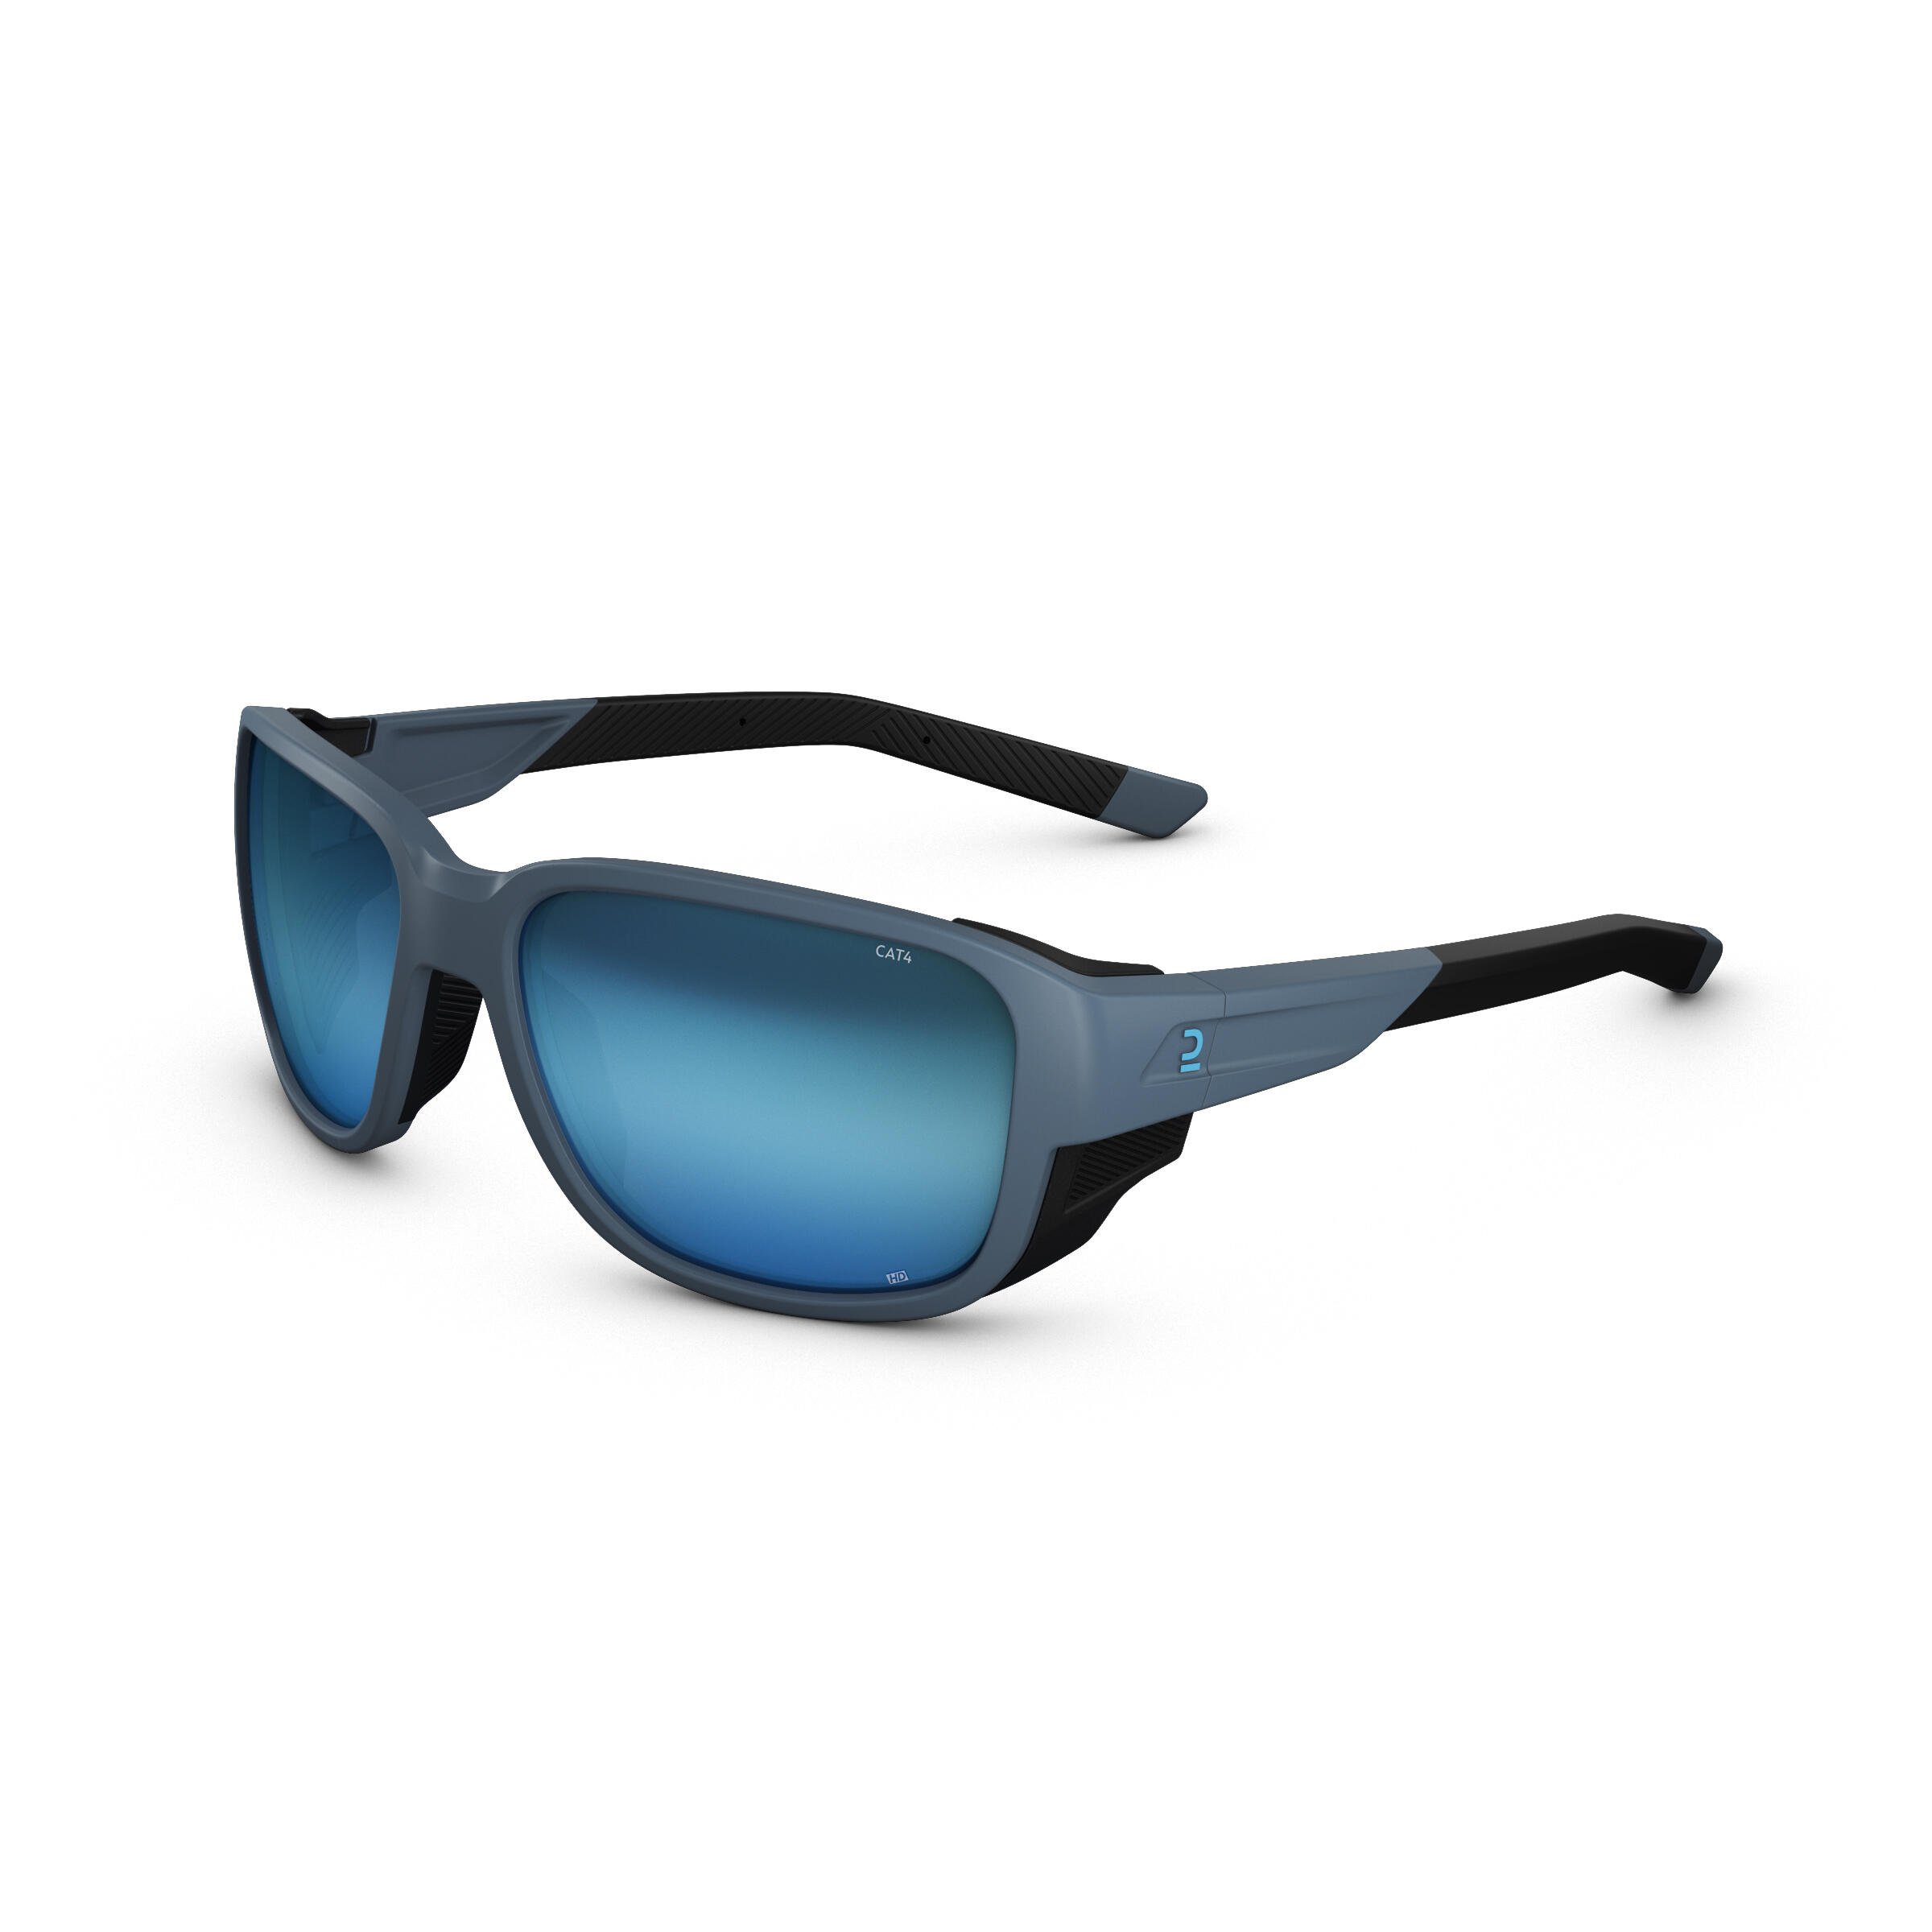 Buy Quechua Adults Hiking Sunglasses - MH570 - Category 4 - Black Blue at  Amazon.in